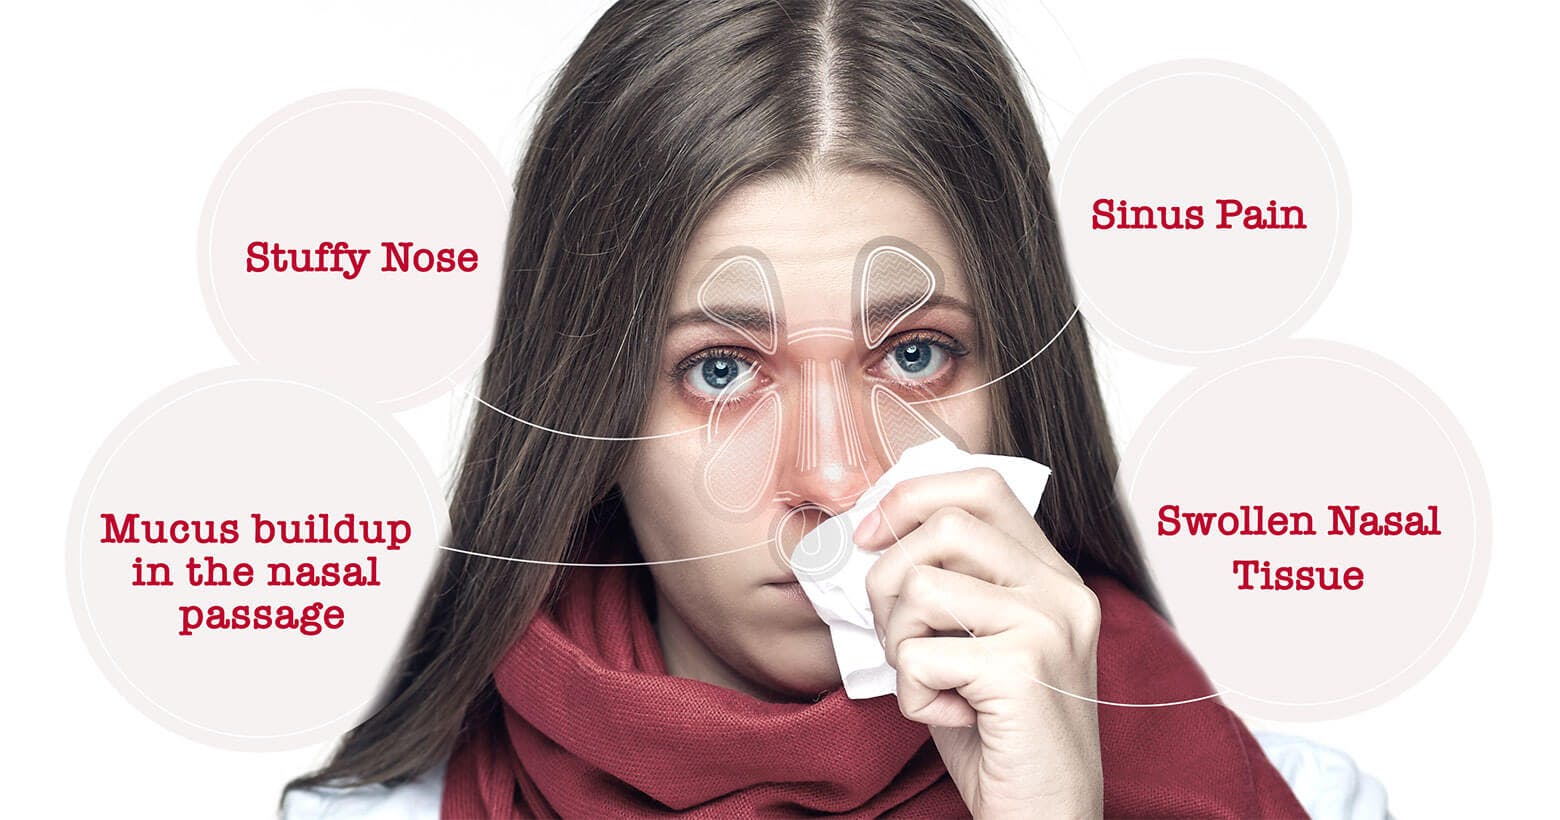 Woman with nasal congestion symptoms